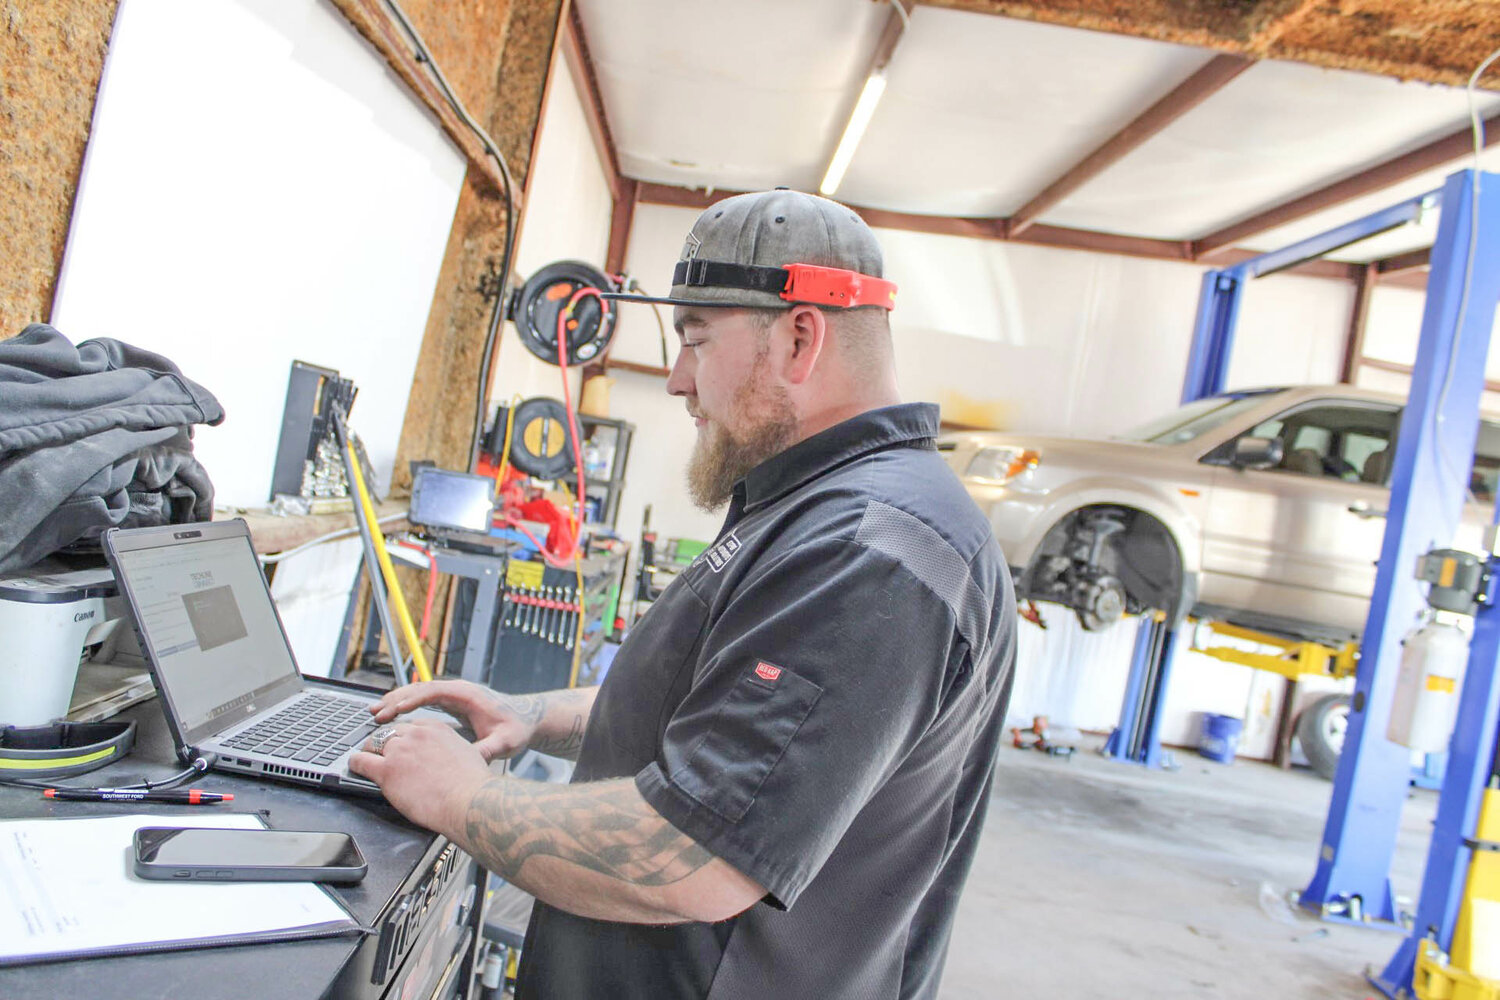 Expert Automotive Solutions is open 8 a.m.-6 p.m. Monday through Friday at its secondary back shop, located at 2000 Supply Ln. Services include everything from electrical diagnostics to maintenance.